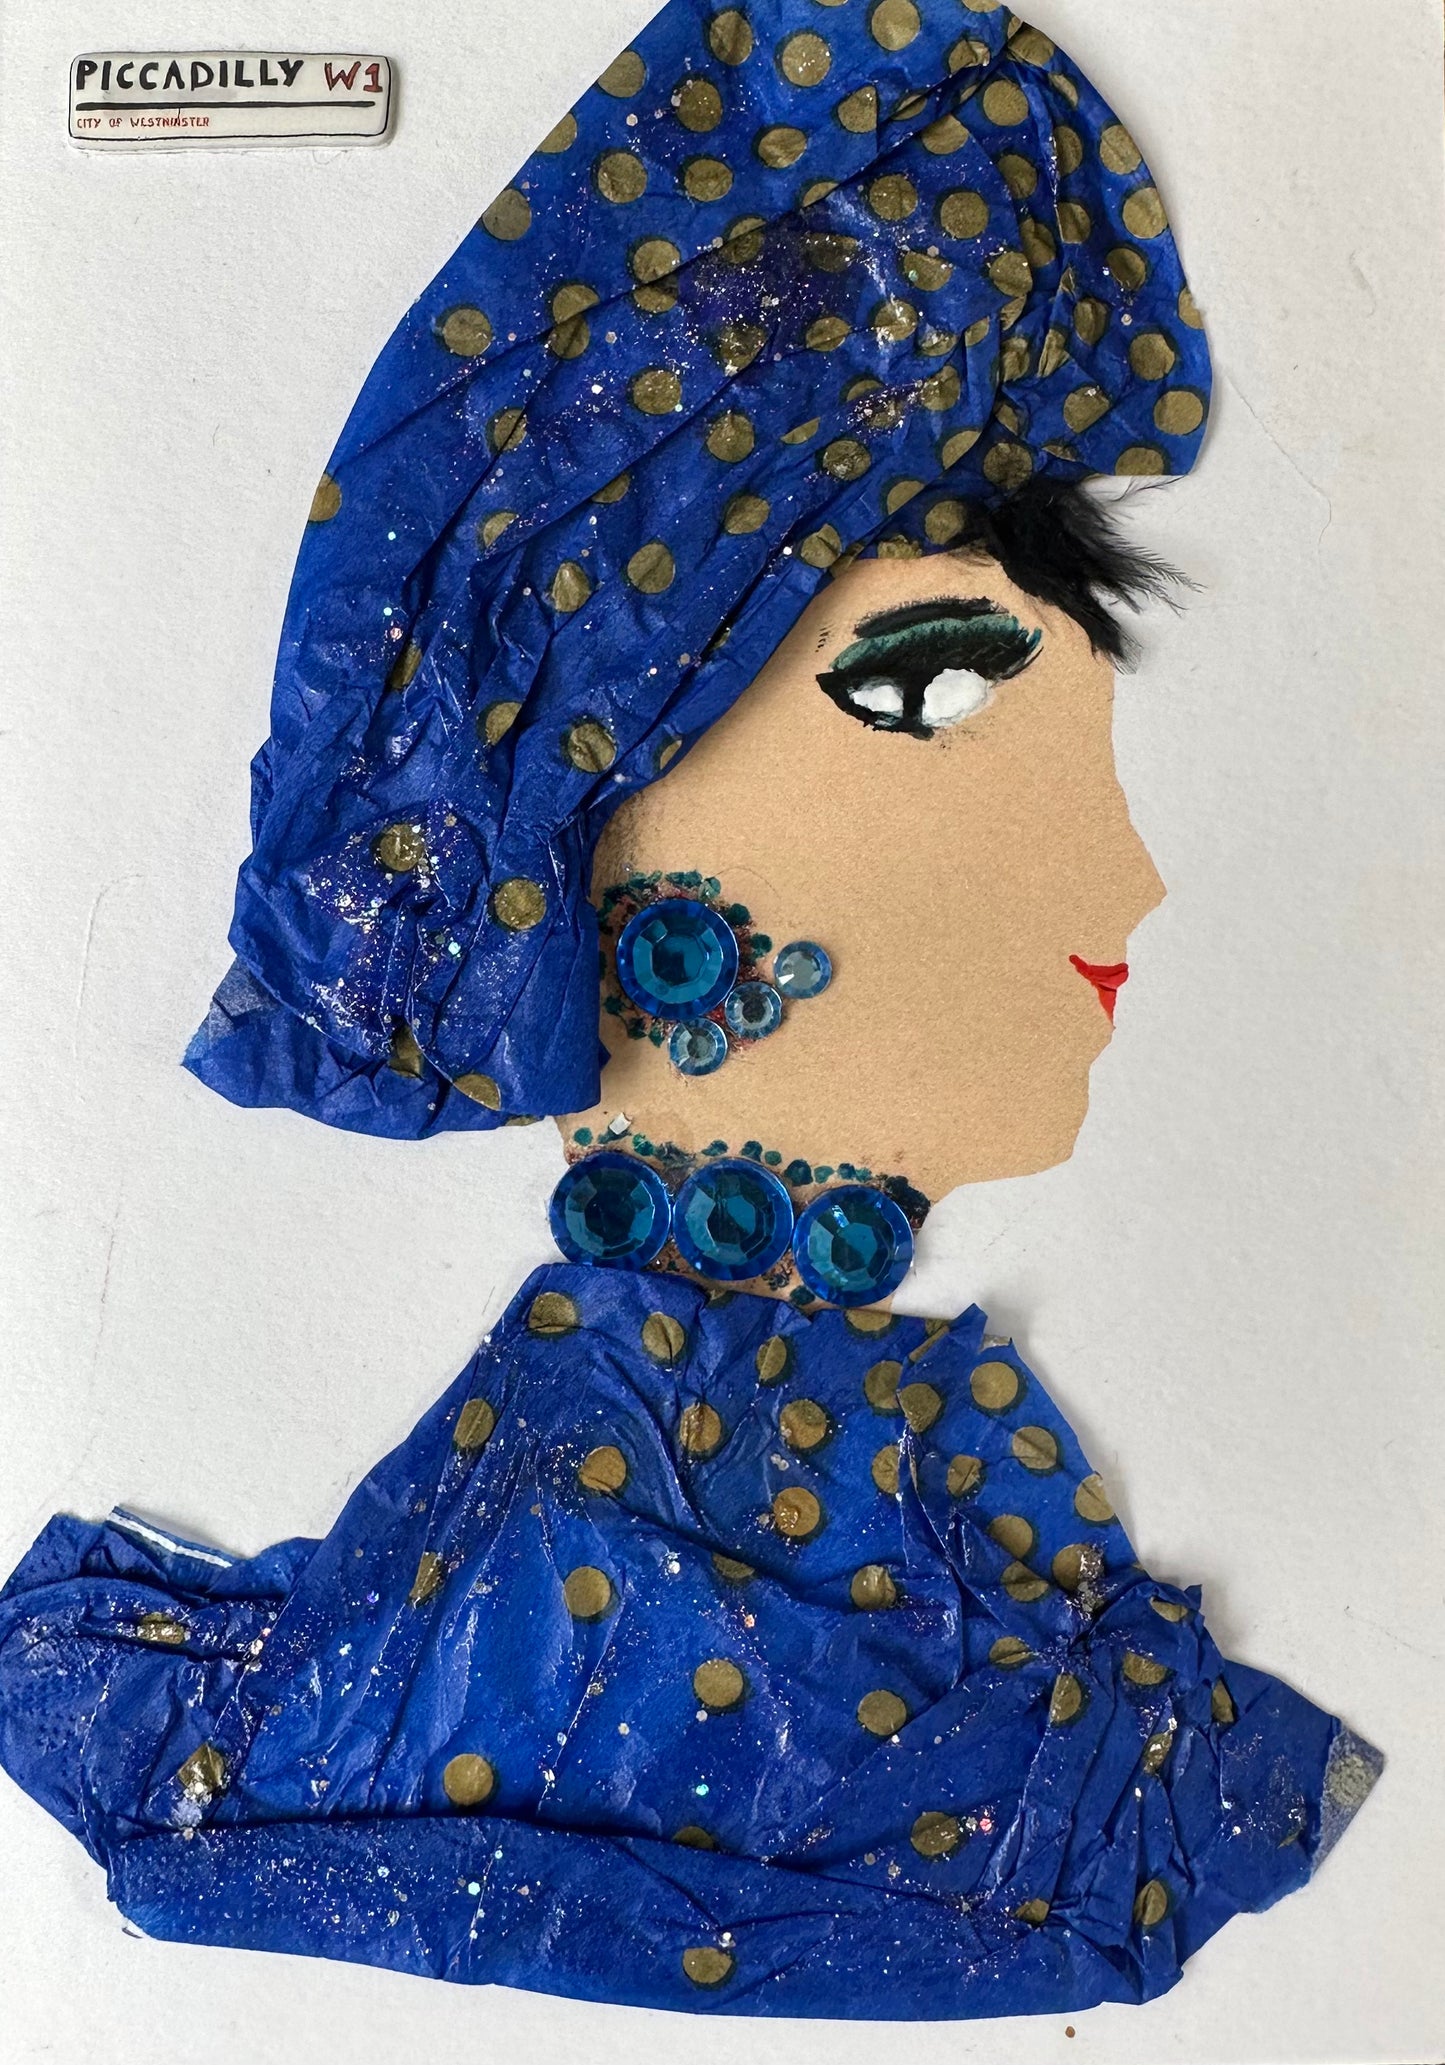 I made this handmade card of Piccadilly Priscilla. She is dressed in an elegant royal blue and gold outfit is paired with a royal blue gemstone necklace and earrings. 